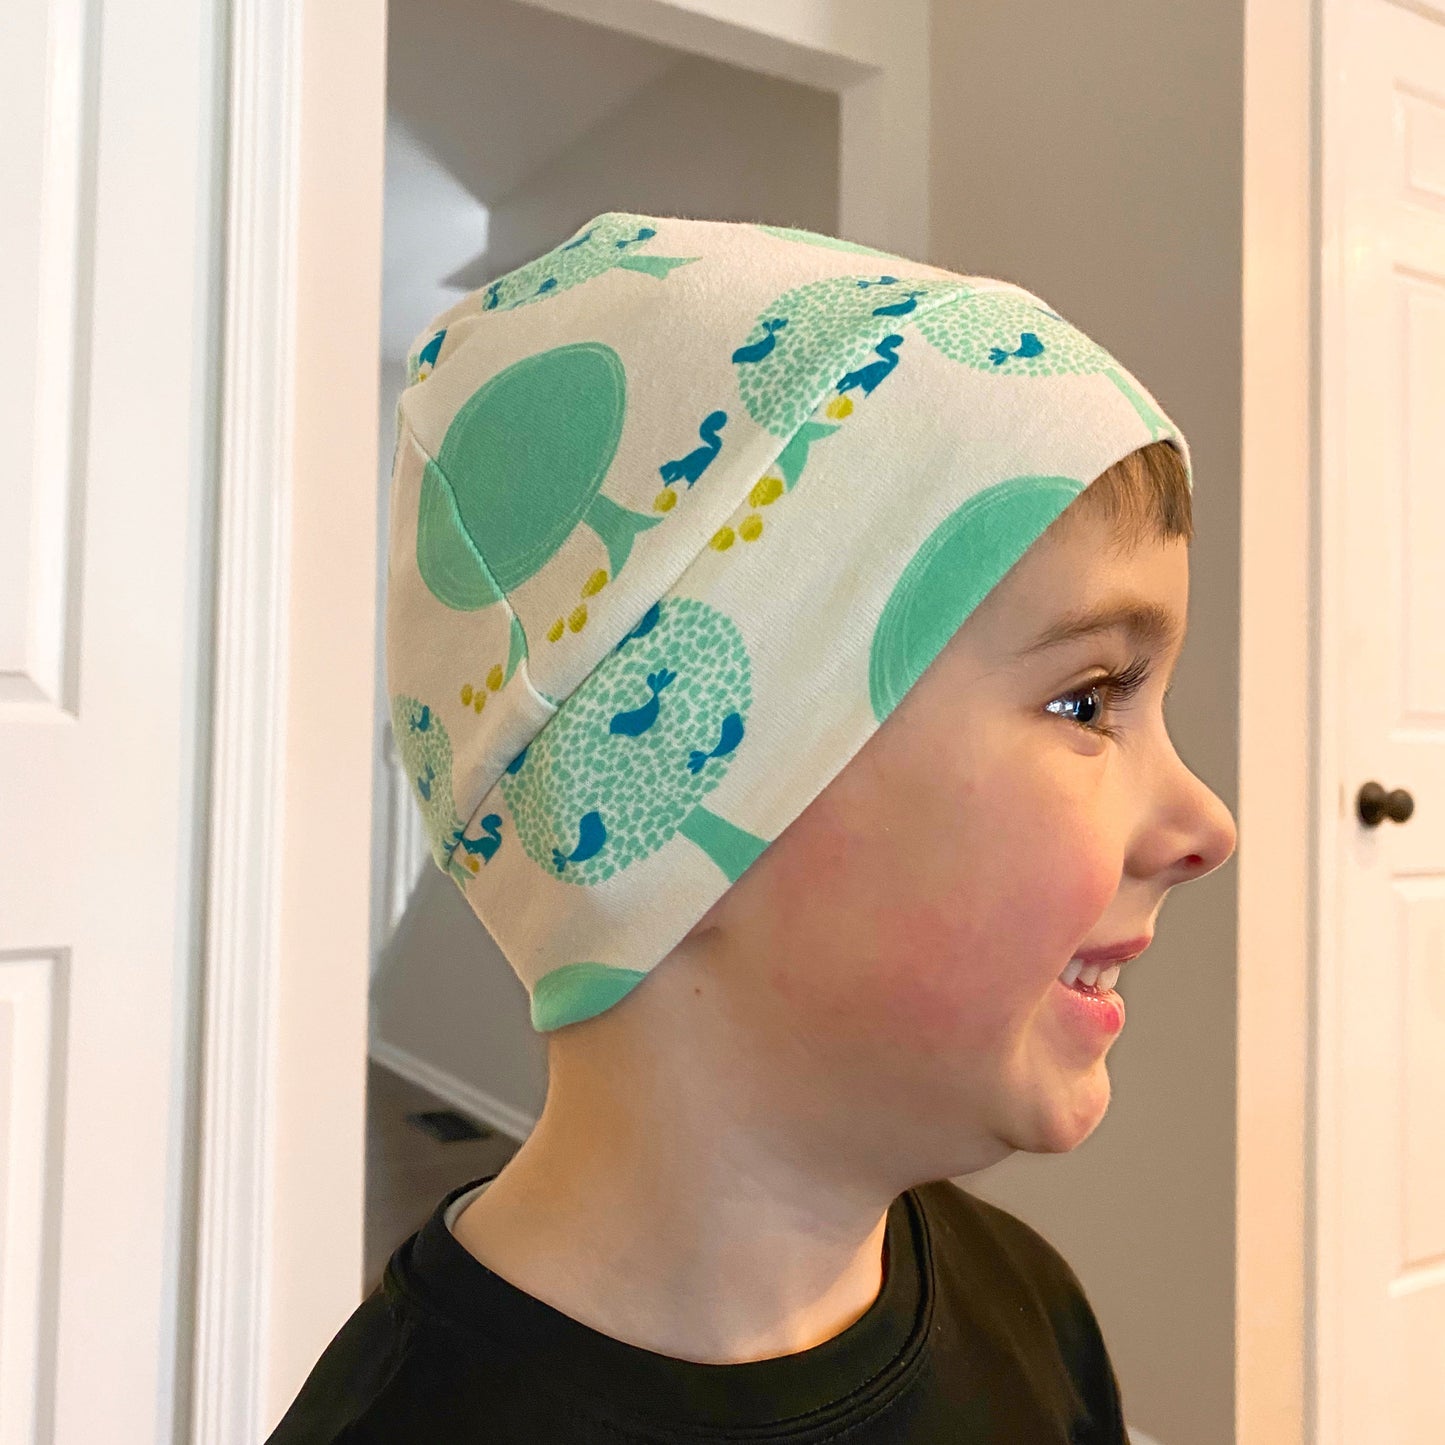 Beanie Hat in Baby: Polka Dots with Leaves